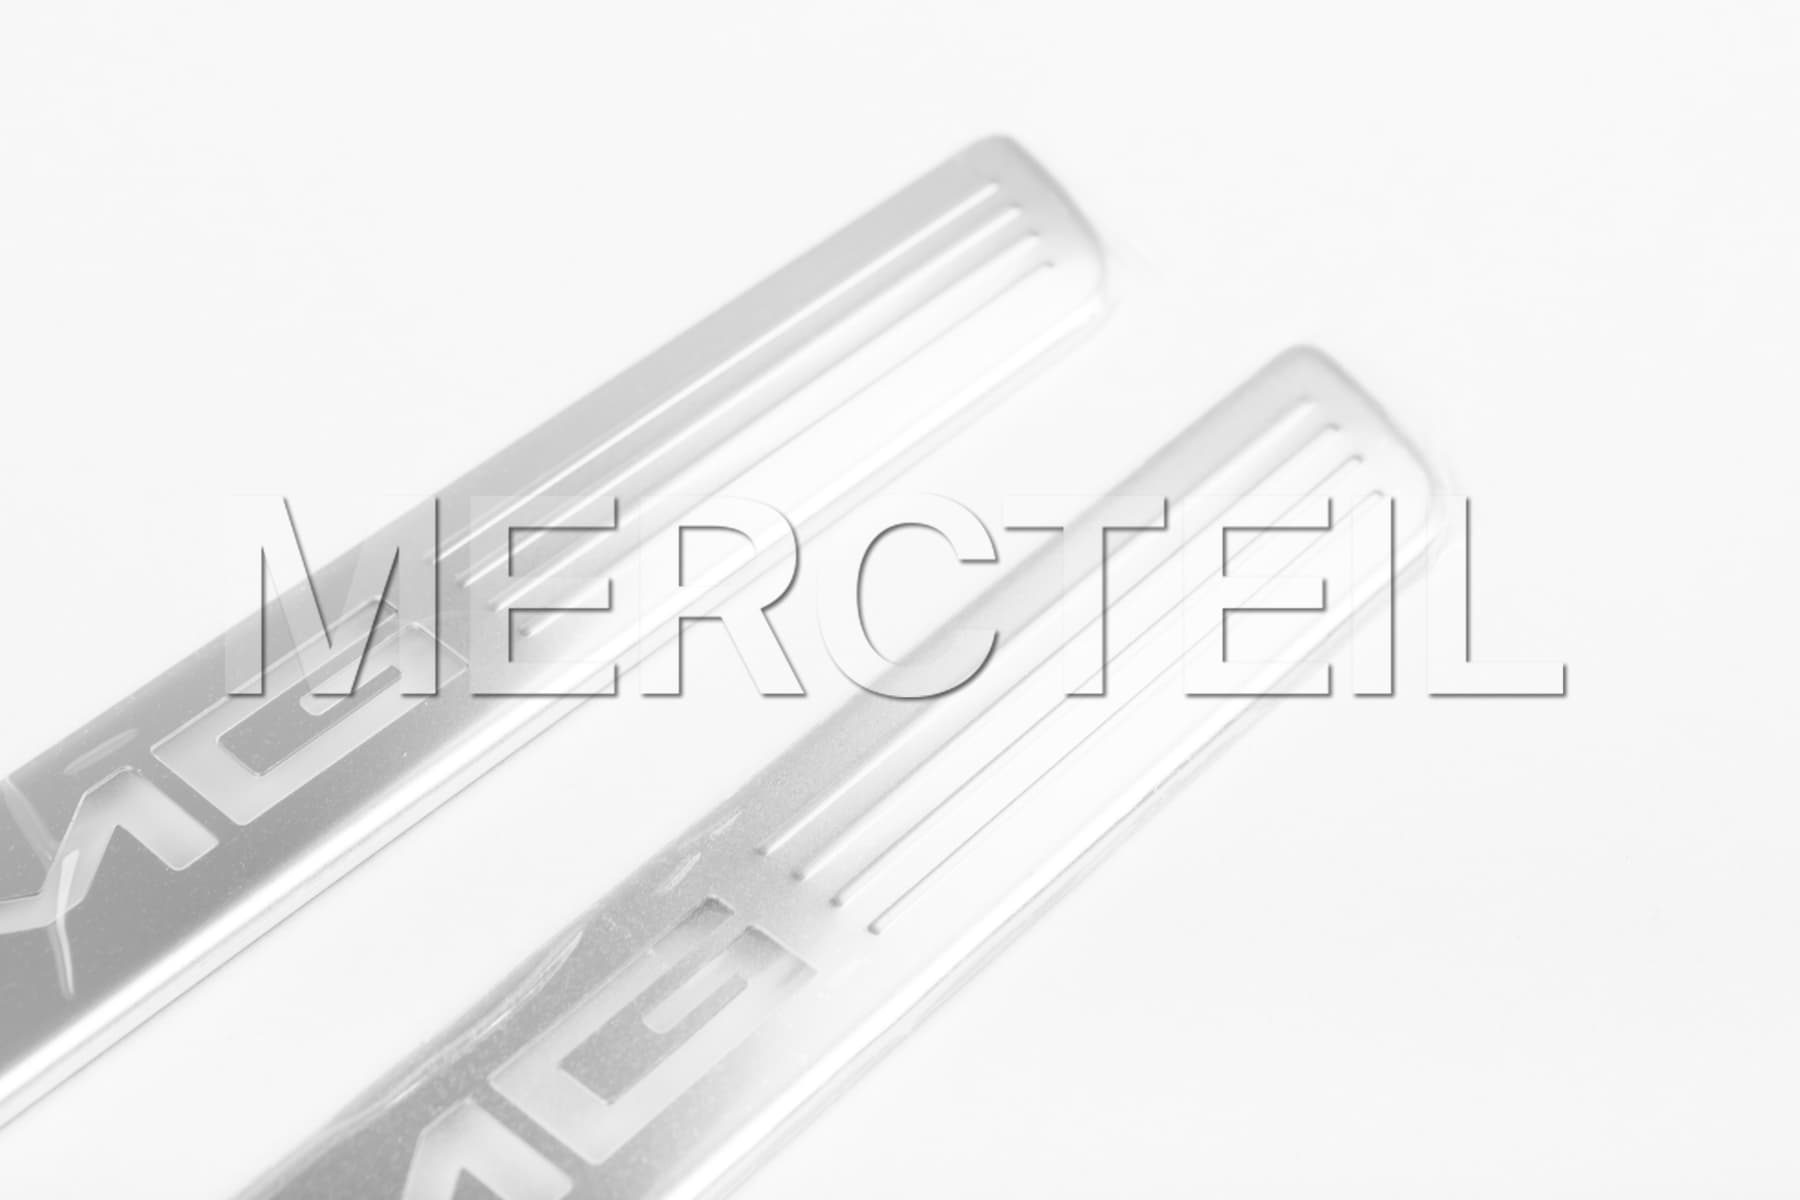 AMG Exchangeable Silver Covers for Illuminated Door Sills Genuine Mercedes AMG (part number: A1776804307)